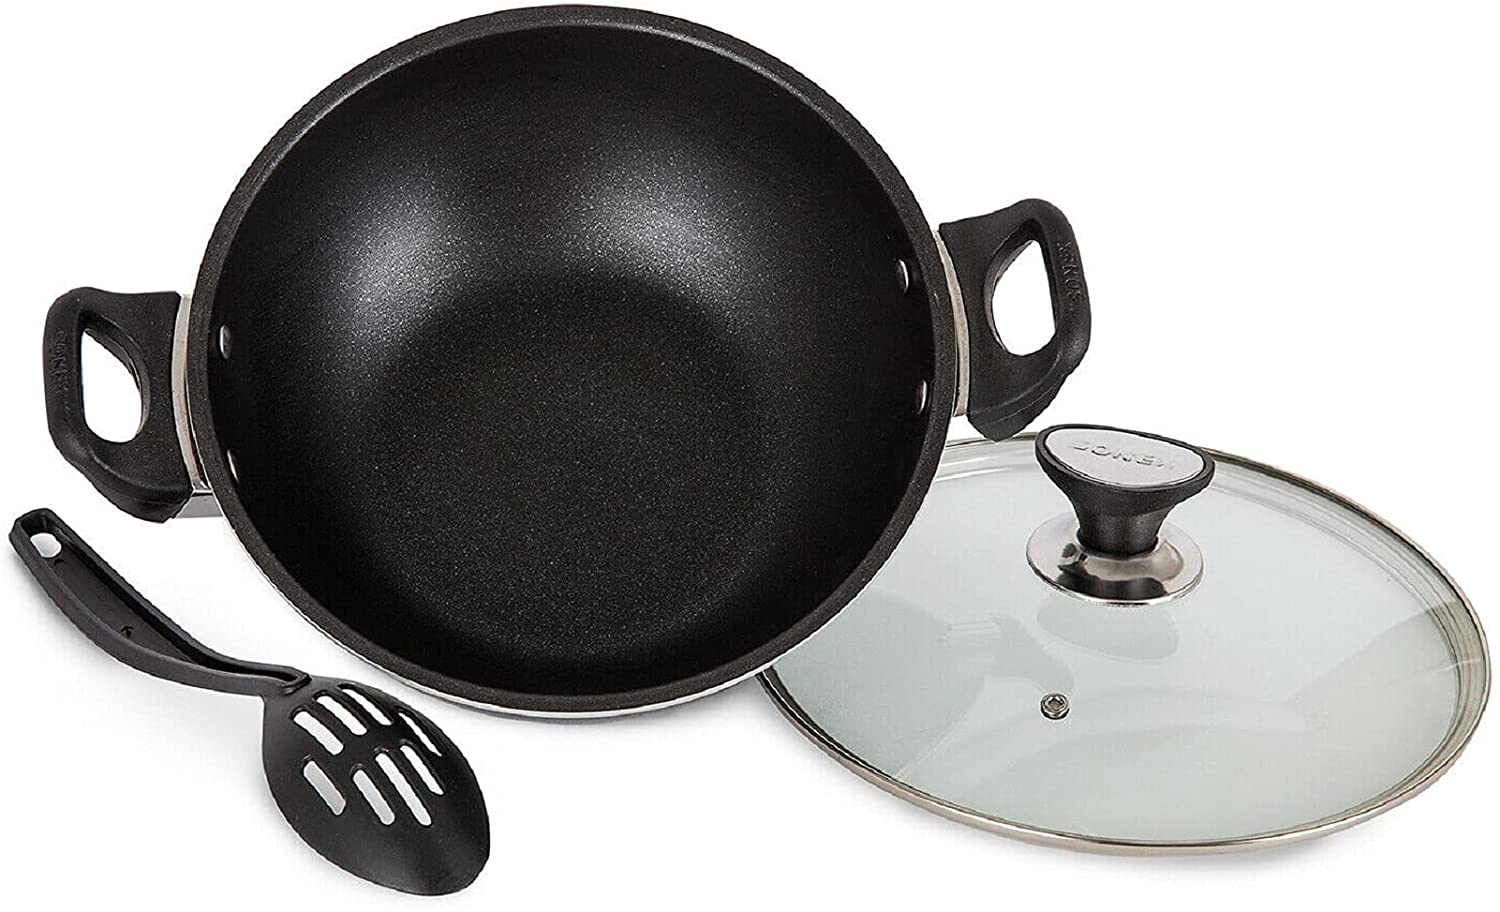 Heavy Material | Dishware Safe | Sonex | Non Stick | Cooking Wok | Kadhai | Karahi | with Glass Lid and Spoon Durable Soft Handles 40 Cm | Easy To Clean | Original Made In Pakistan – 50147